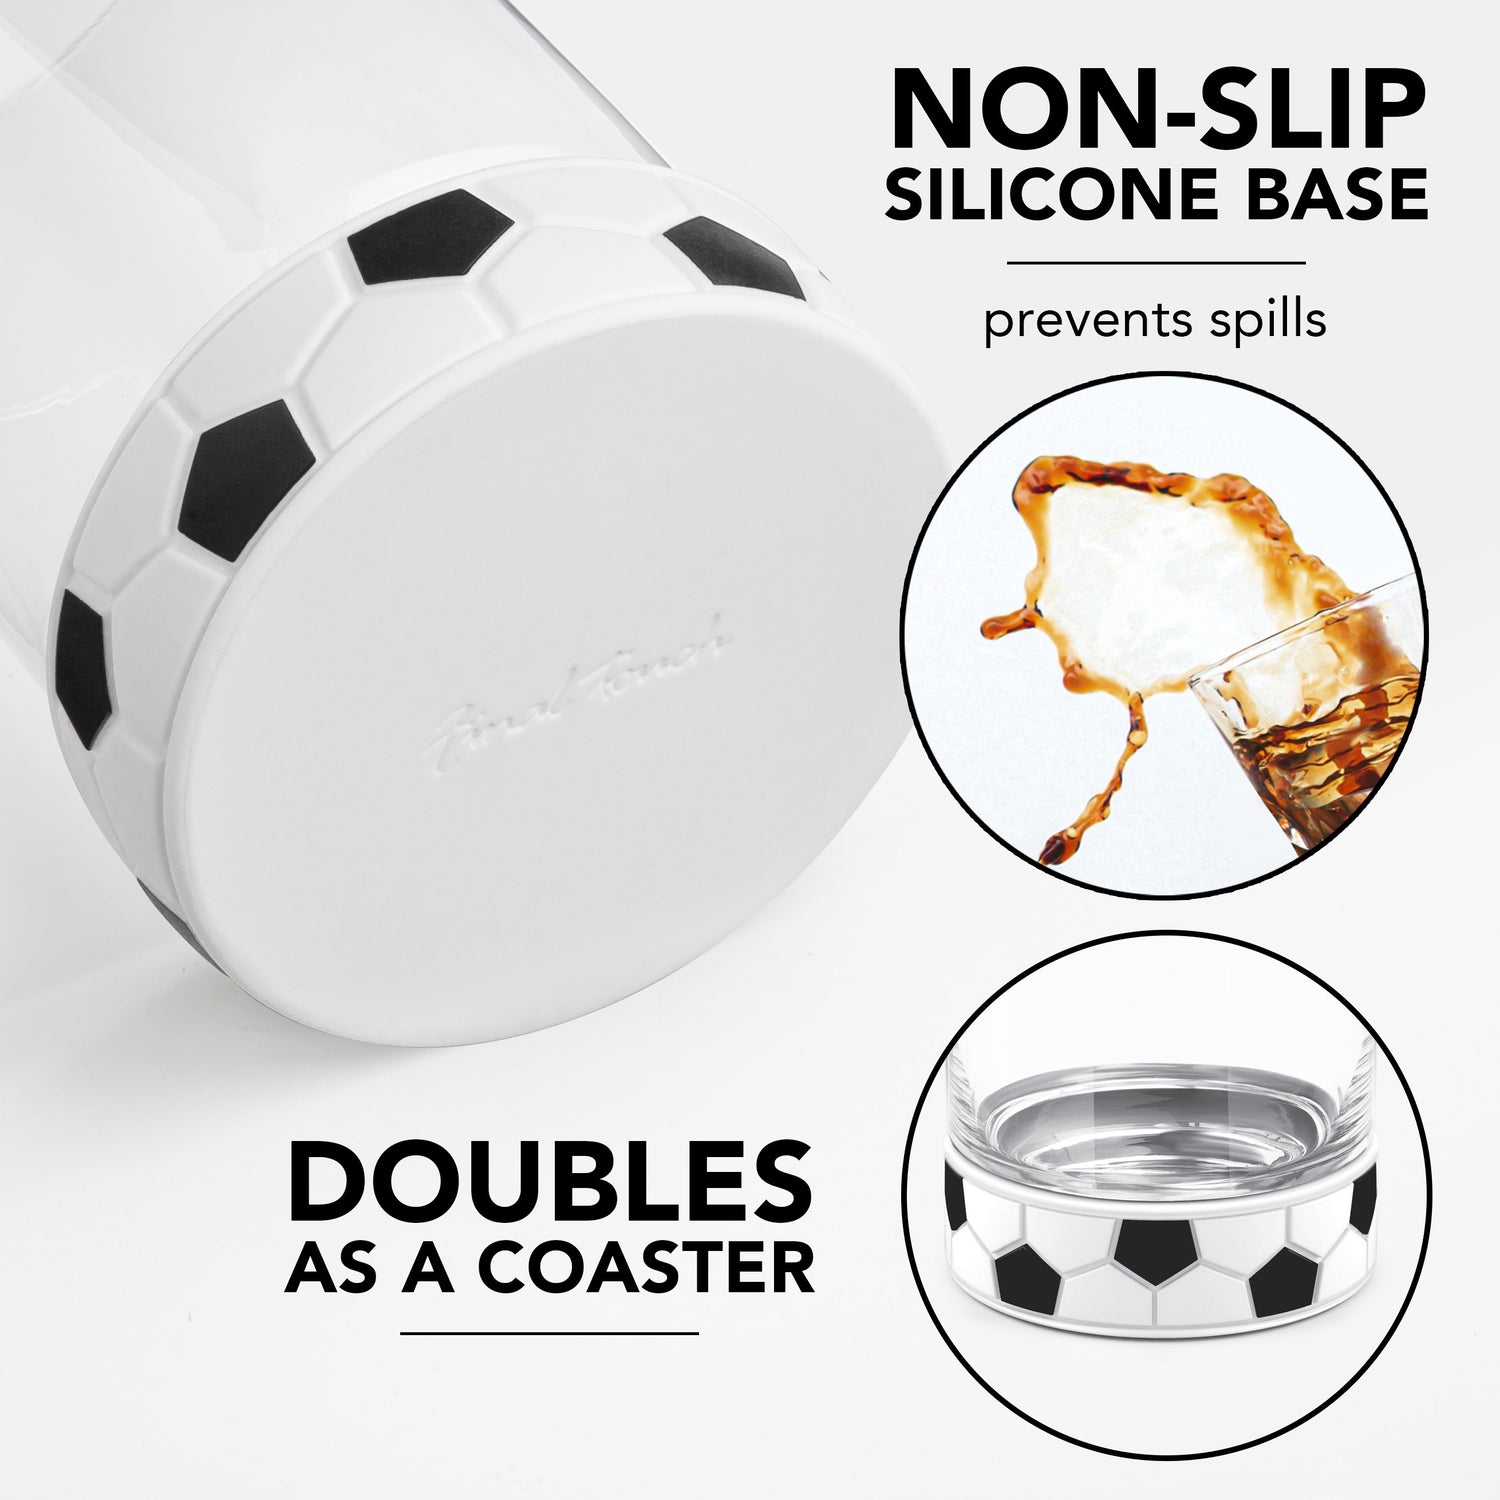 Kick-Off Soccer / Football Tumbler with Ice Mould